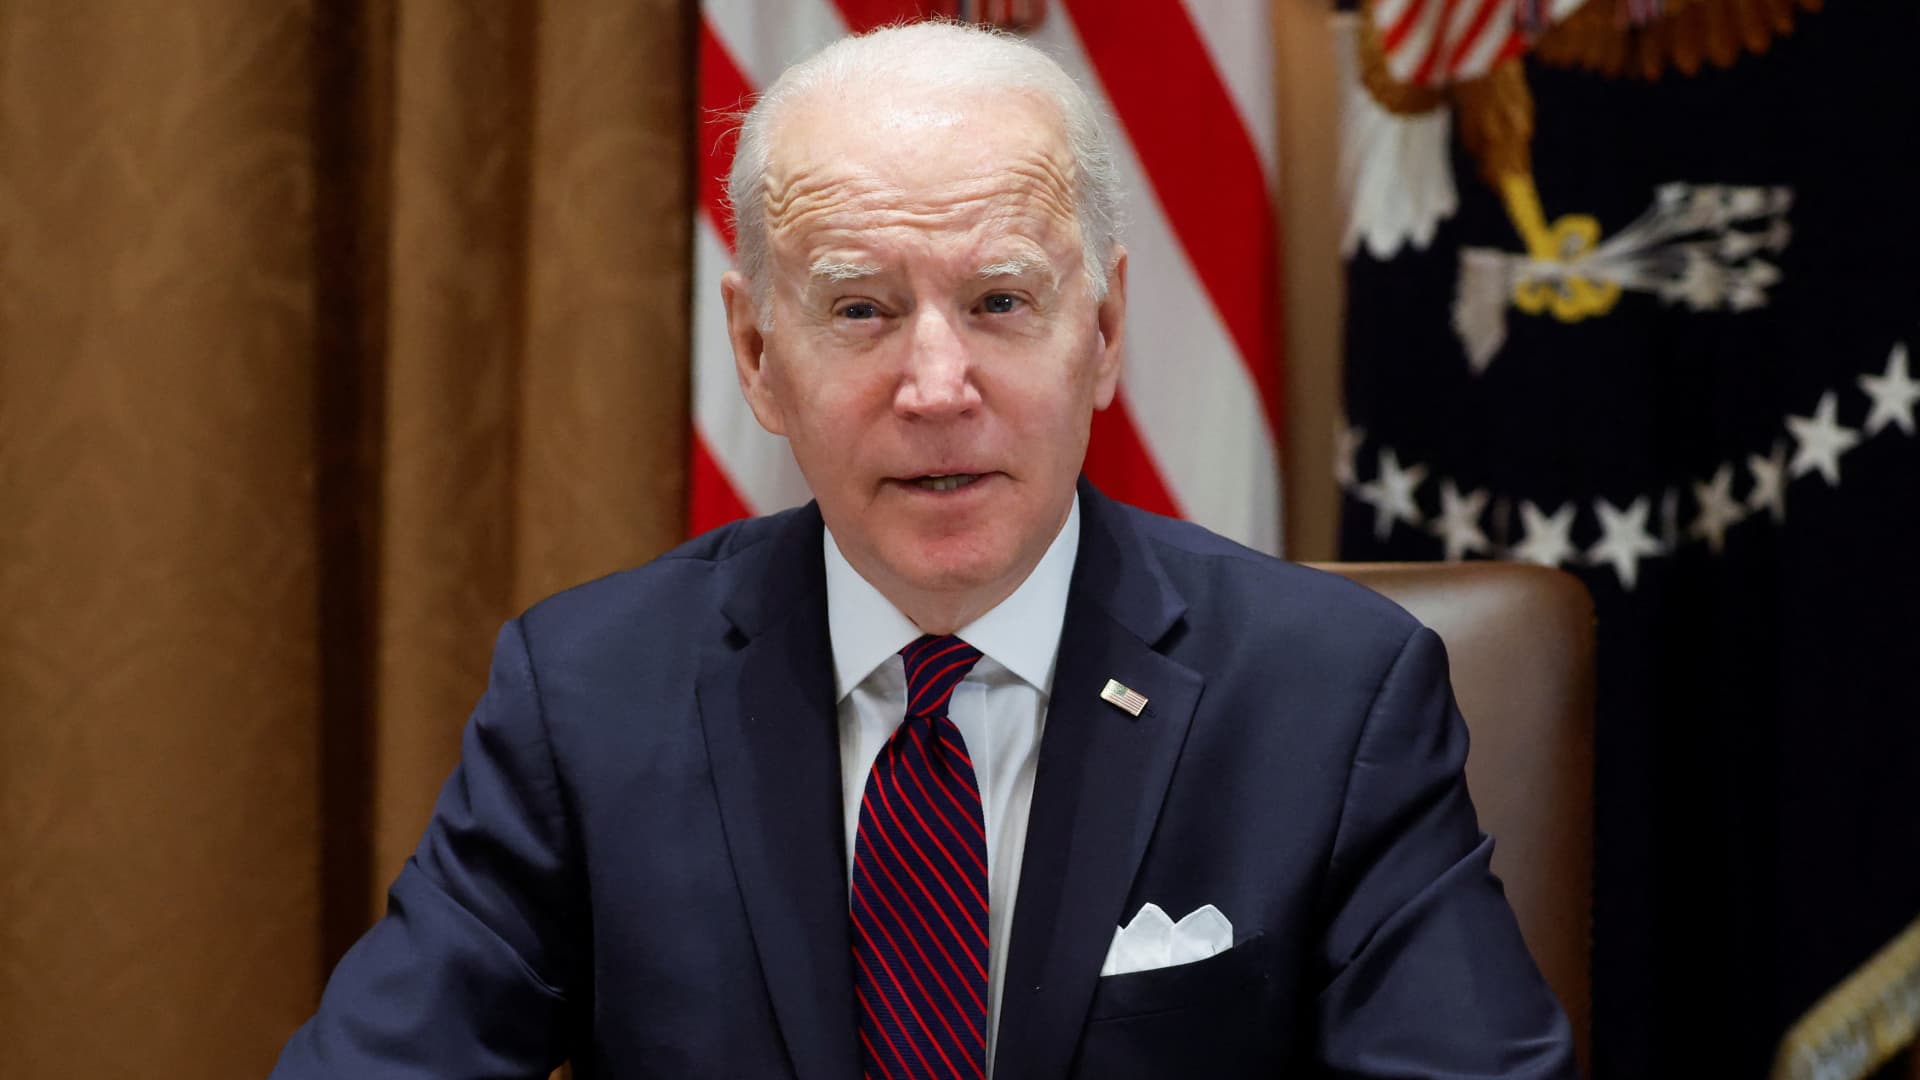 U.S. President Joe Biden speaks to reporters on the situation in Ukraine before a meeting with his Infrastructure Implementation Task Force, in the Cabinet Room at the White House, in Washington, U.S., January 20, 2022.